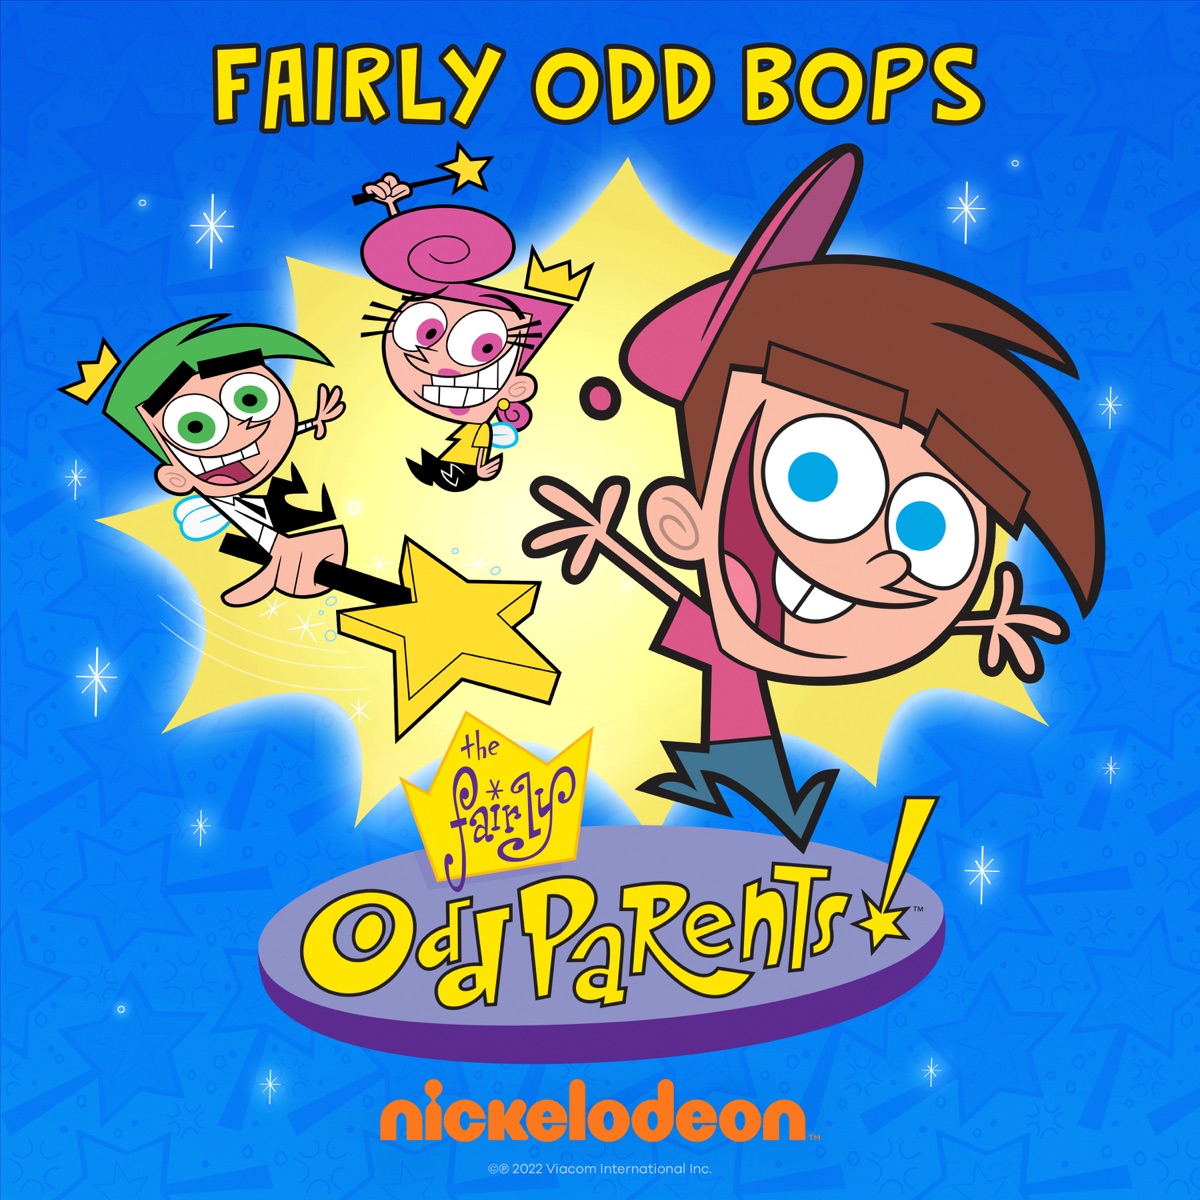 The Fairly Odd Parents - Album by Nickelodeon - Apple Music